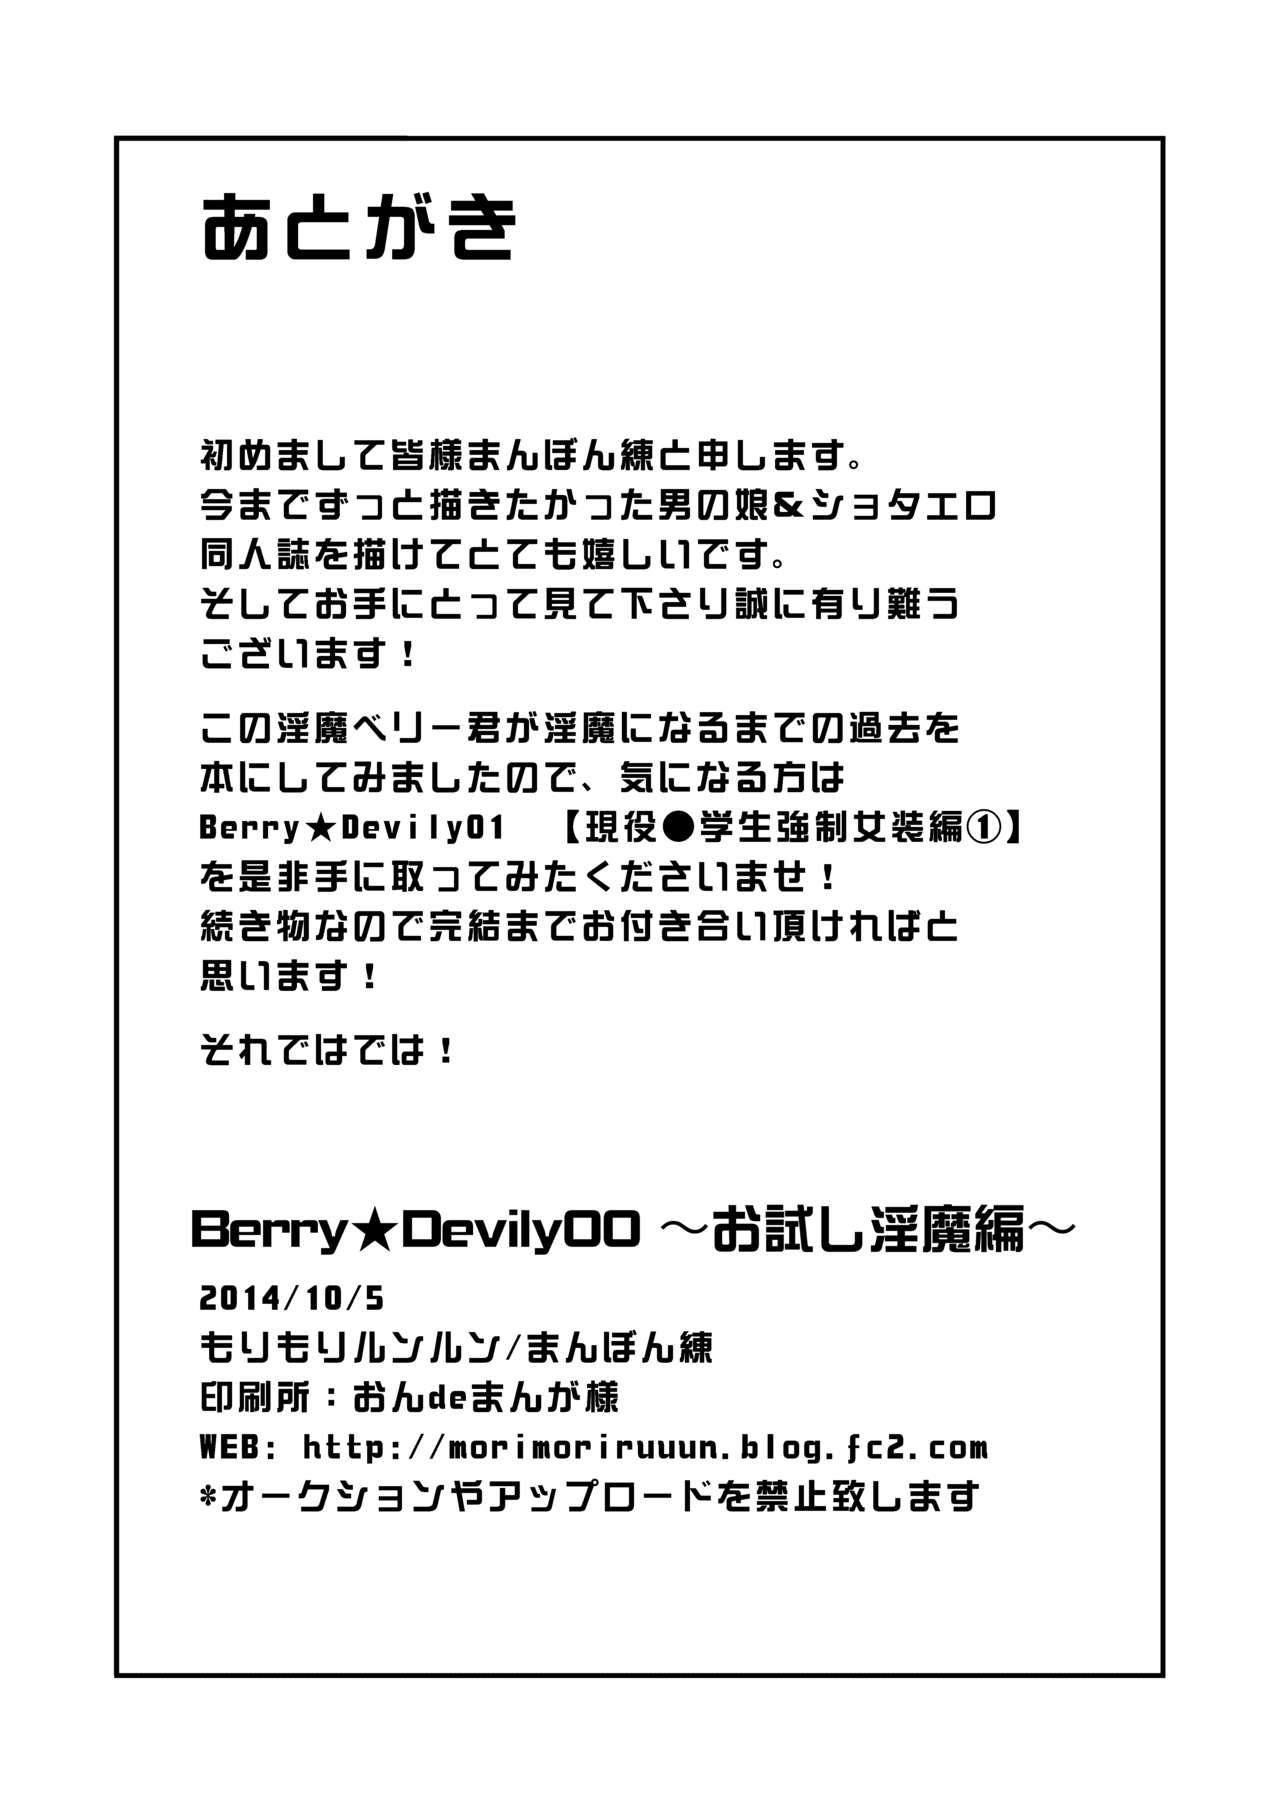 Berry Devily 30